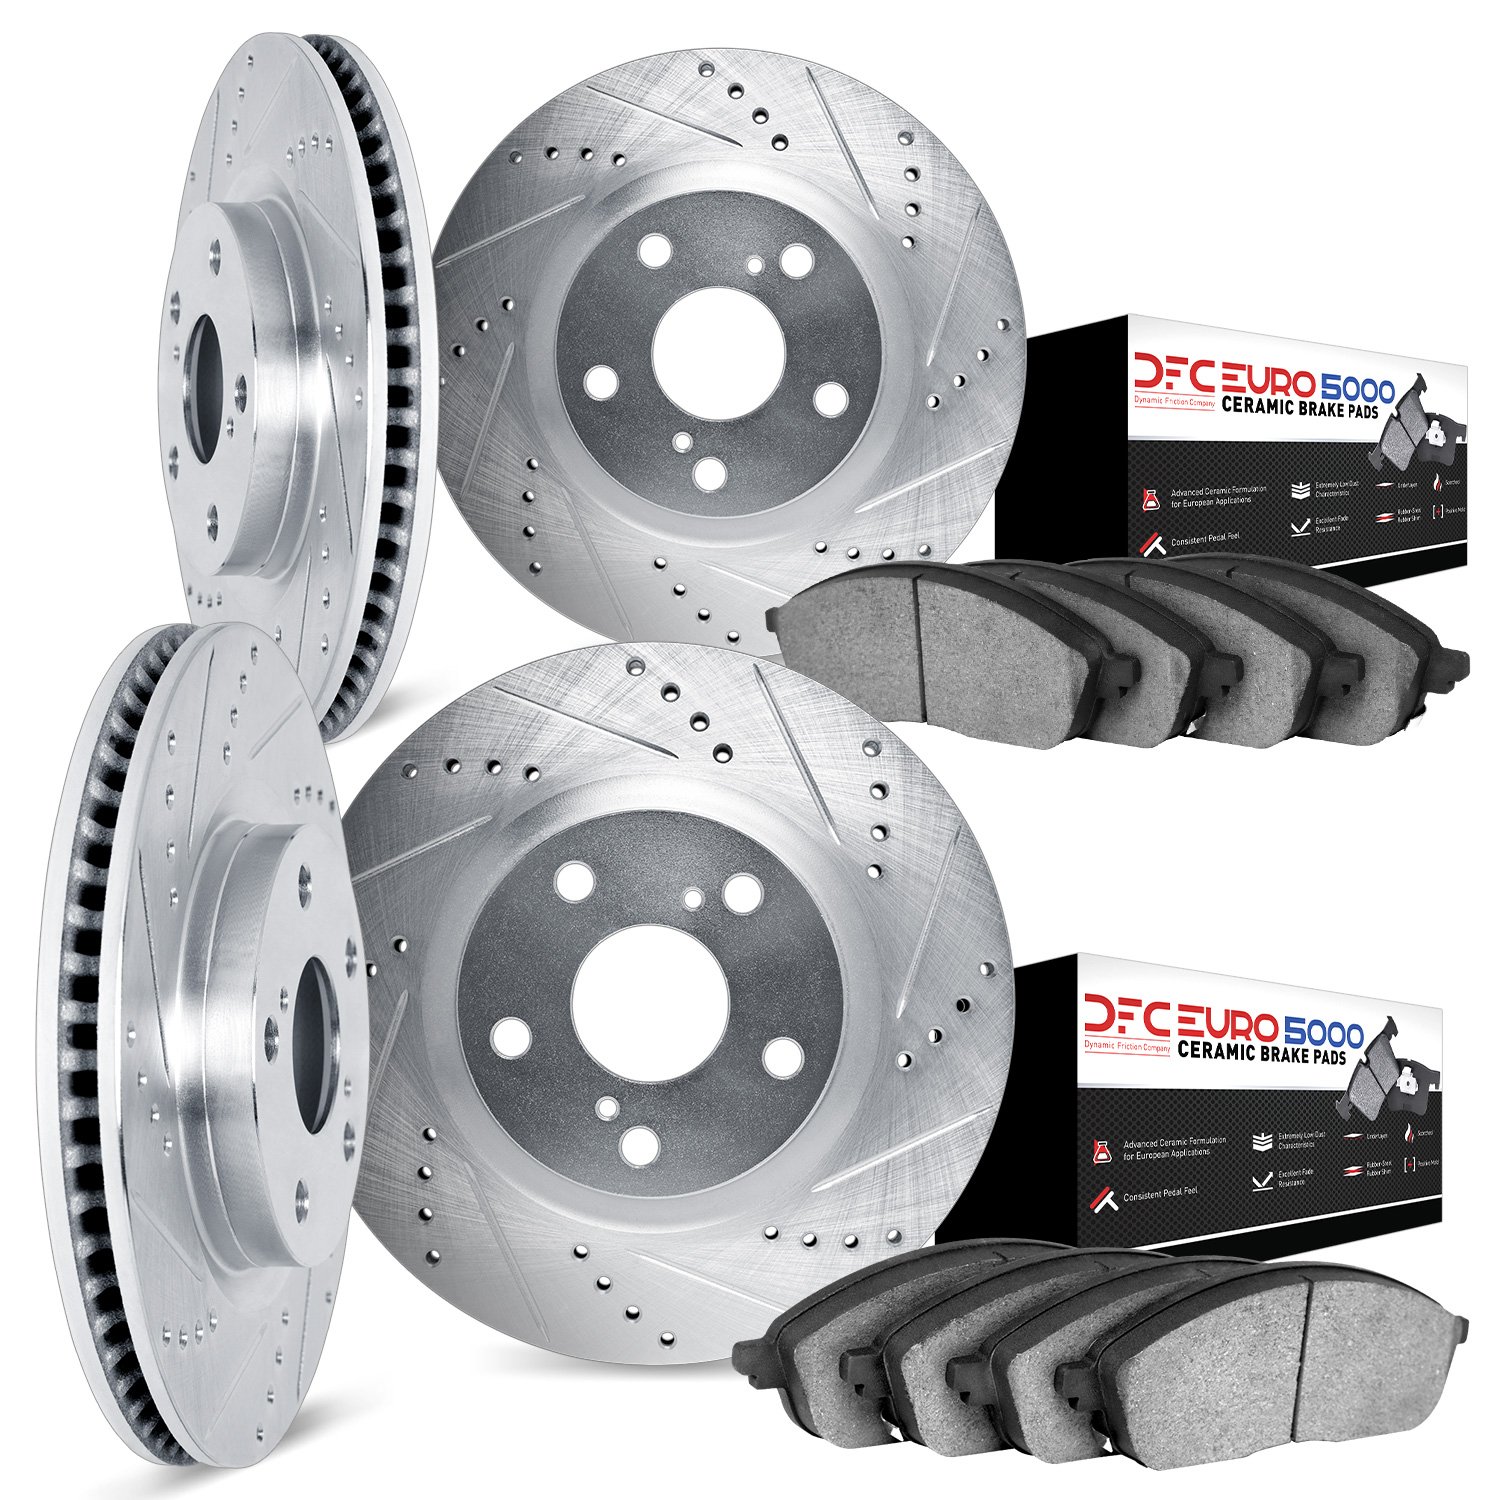 7604-31026 Drilled/Slotted Brake Rotors w/5000 Euro Ceramic Brake Pads Kit [Silver], 2010-2017 BMW, Position: Front and Rear